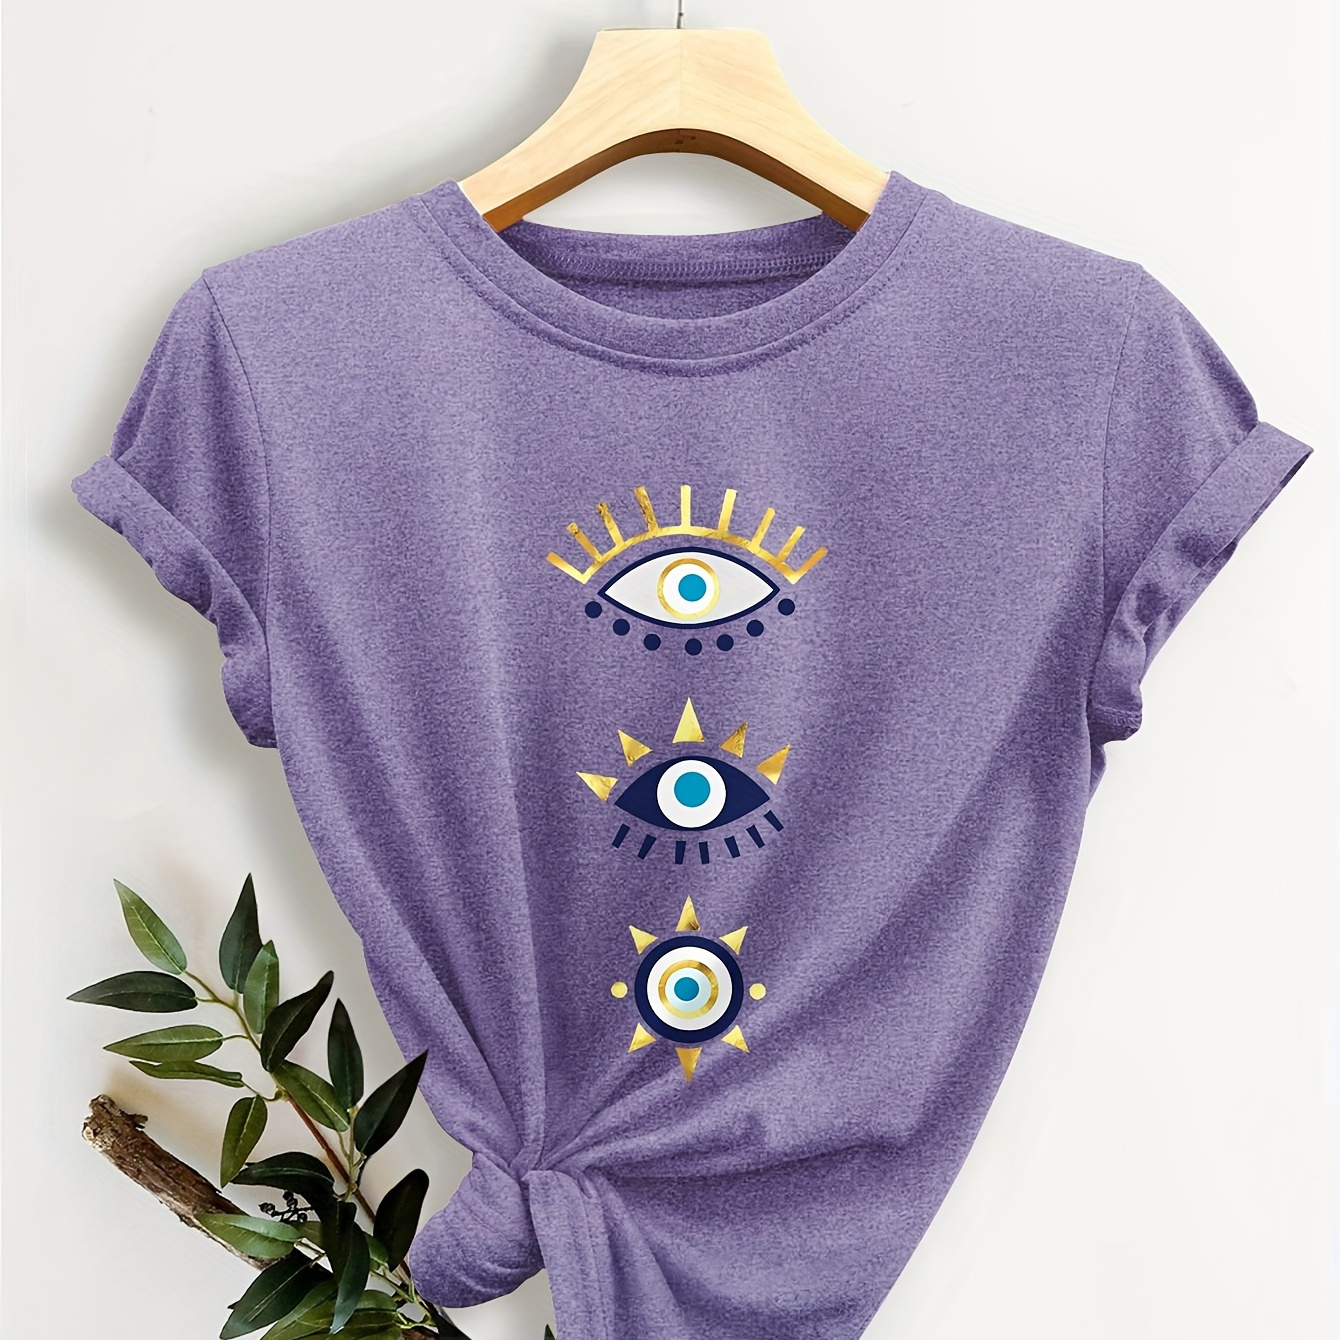 

Women's Vintage-inspired Casual Short Sleeve T-shirt With Triple Eye Graphic, Casual Summer Tee, Round Neck, Relaxed Fit